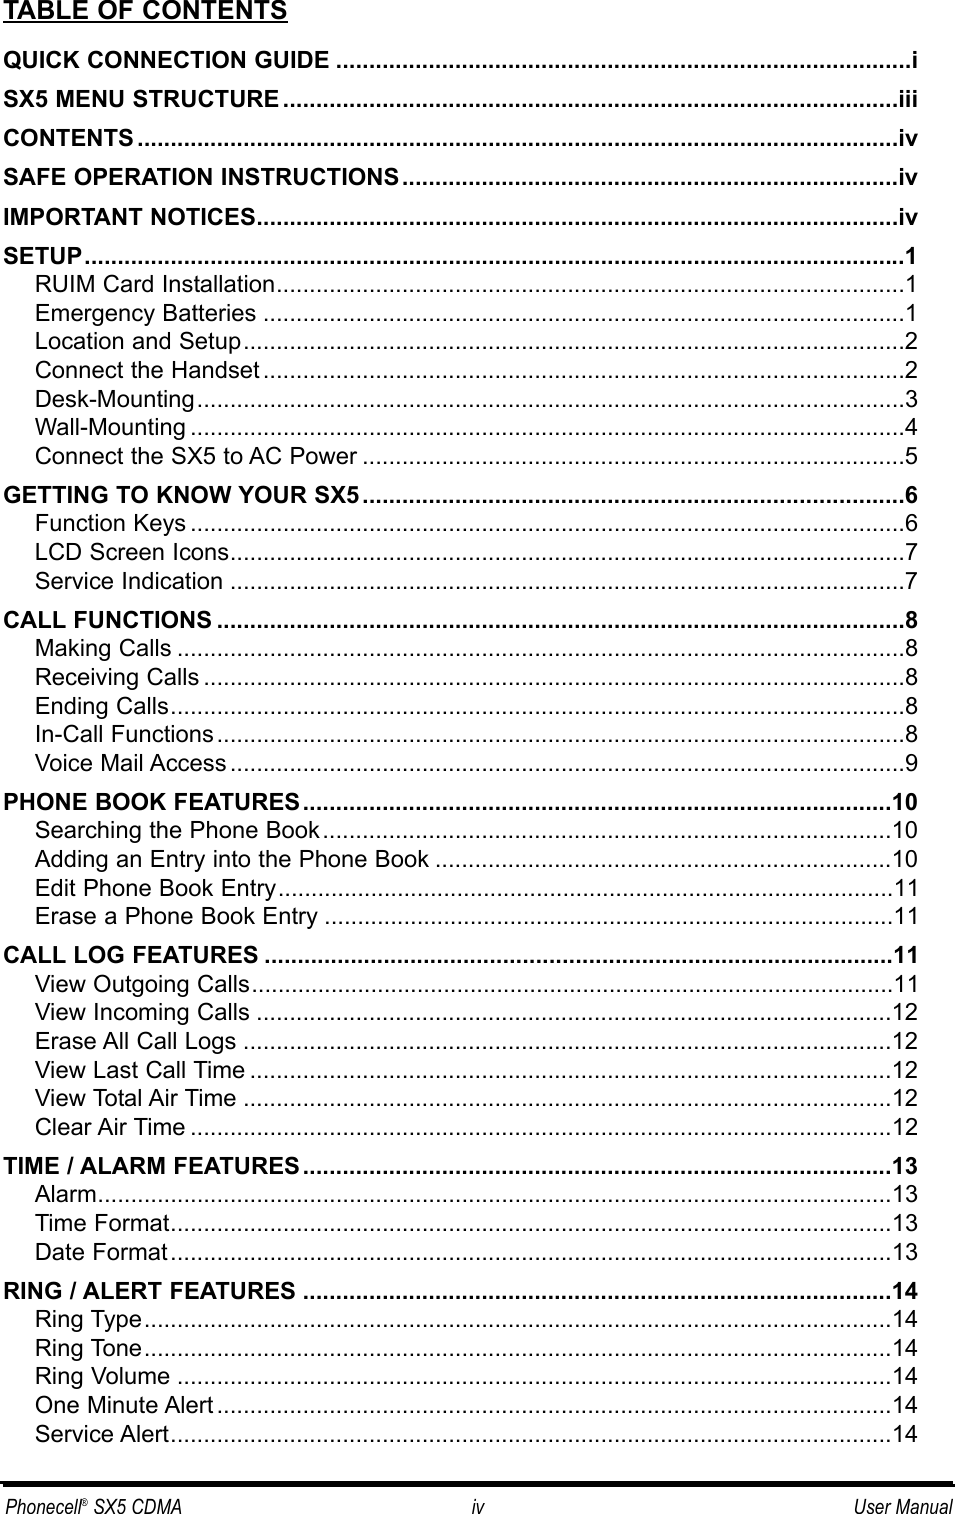 TABLE OF CONTENTSQUICK CONNECTION GUIDE .......................................................................................iSX5 MENU STRUCTURE .............................................................................................iiiCONTENTS ...................................................................................................................ivSAFE OPERATION INSTRUCTIONS...........................................................................ivIMPORTANT NOTICES.................................................................................................ivSETUP............................................................................................................................1RUIM Card Installation...............................................................................................1Emergency Batteries .................................................................................................1Location and Setup....................................................................................................2Connect the Handset .................................................................................................2Desk-Mounting...........................................................................................................3Wall-Mounting ............................................................................................................4Connect the SX5 to AC Power ..................................................................................5GETTING TO KNOW YOUR SX5..................................................................................6Function Keys ............................................................................................................6LCD Screen Icons......................................................................................................7Service Indication ......................................................................................................7CALL FUNCTIONS ........................................................................................................8Making Calls ..............................................................................................................8Receiving Calls ..........................................................................................................8Ending Calls...............................................................................................................8In-Call Functions........................................................................................................8Voice Mail Access ......................................................................................................9PHONE BOOK FEATURES.........................................................................................10Searching the Phone Book......................................................................................10Adding an Entry into the Phone Book .....................................................................10Edit Phone Book Entry.............................................................................................11Erase a Phone Book Entry ......................................................................................11CALL LOG FEATURES ...............................................................................................11View Outgoing Calls.................................................................................................11View Incoming Calls ................................................................................................12Erase All Call Logs ..................................................................................................12View Last Call Time .................................................................................................12View Total Air Time ..................................................................................................12Clear Air Time ..........................................................................................................12TIME / ALARM FEATURES.........................................................................................13Alarm........................................................................................................................13Time Format.............................................................................................................13Date Format.............................................................................................................13RING / ALERT FEATURES .........................................................................................14Ring Type.................................................................................................................14Ring Tone.................................................................................................................14Ring Volume ............................................................................................................14One Minute Alert ......................................................................................................14Service Alert.............................................................................................................14Phonecell®SX5 CDMA iv User Manual